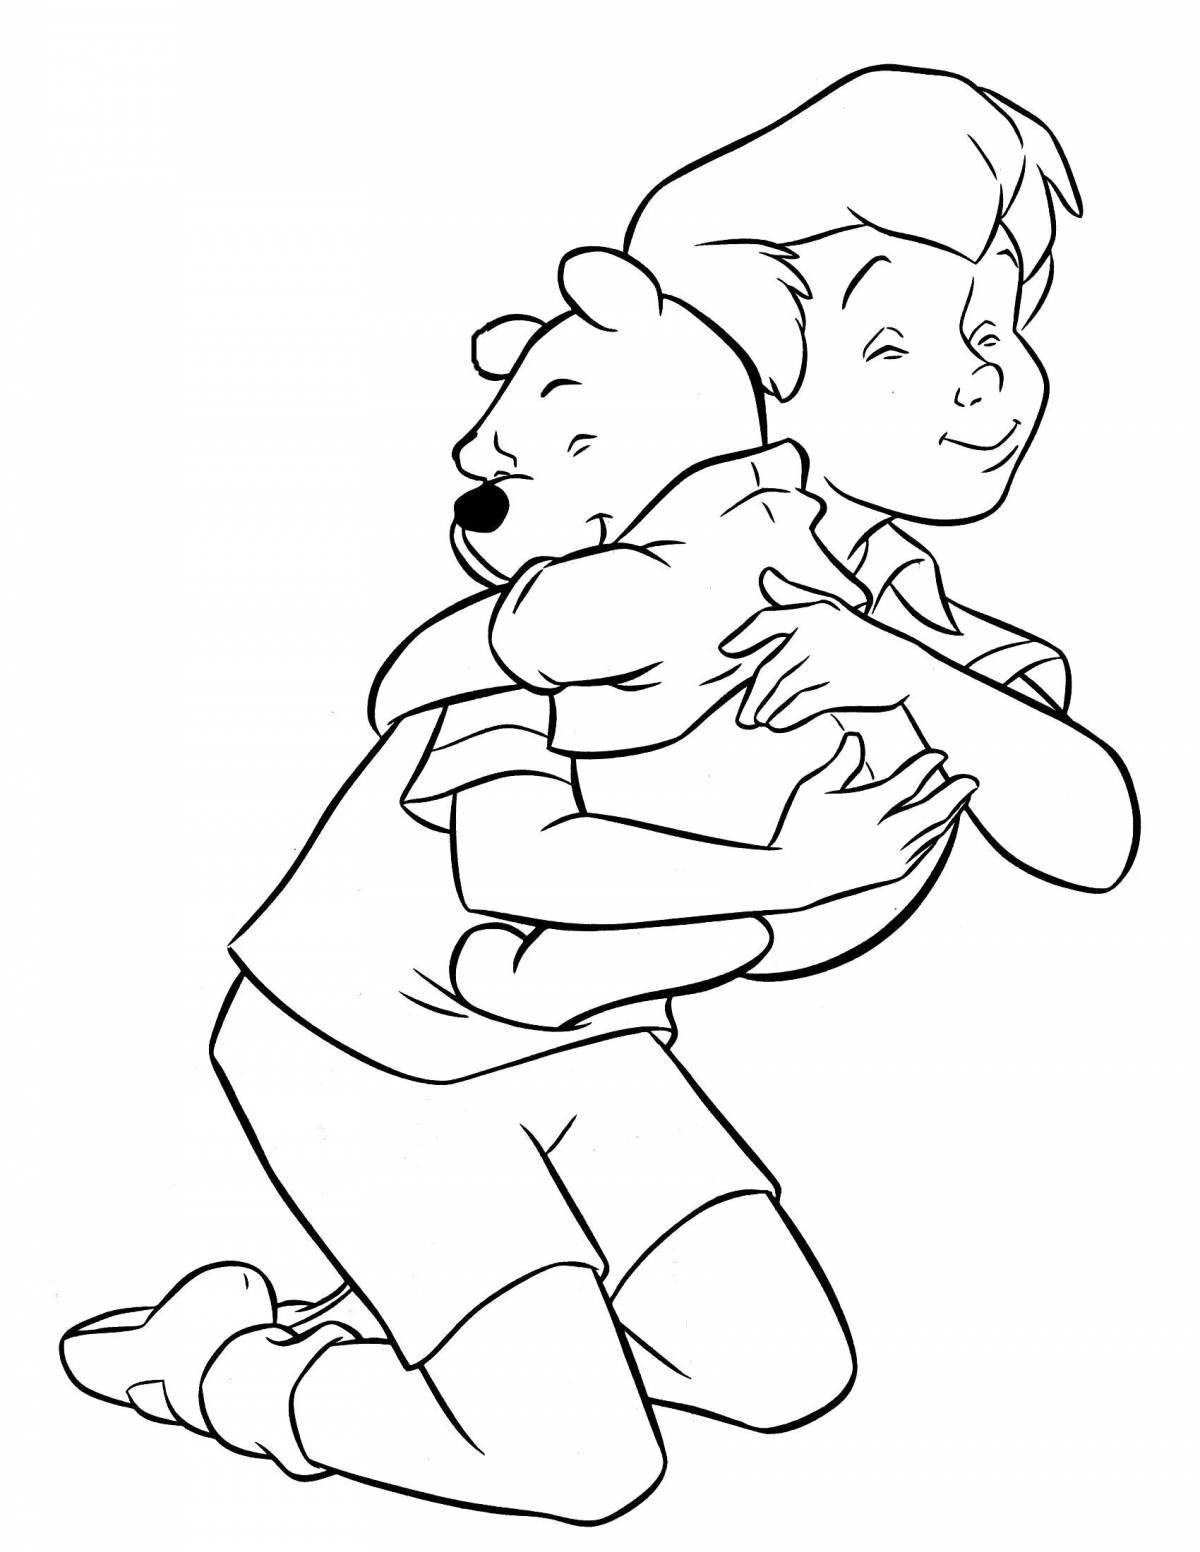 Coloring book joyous hug day for kids